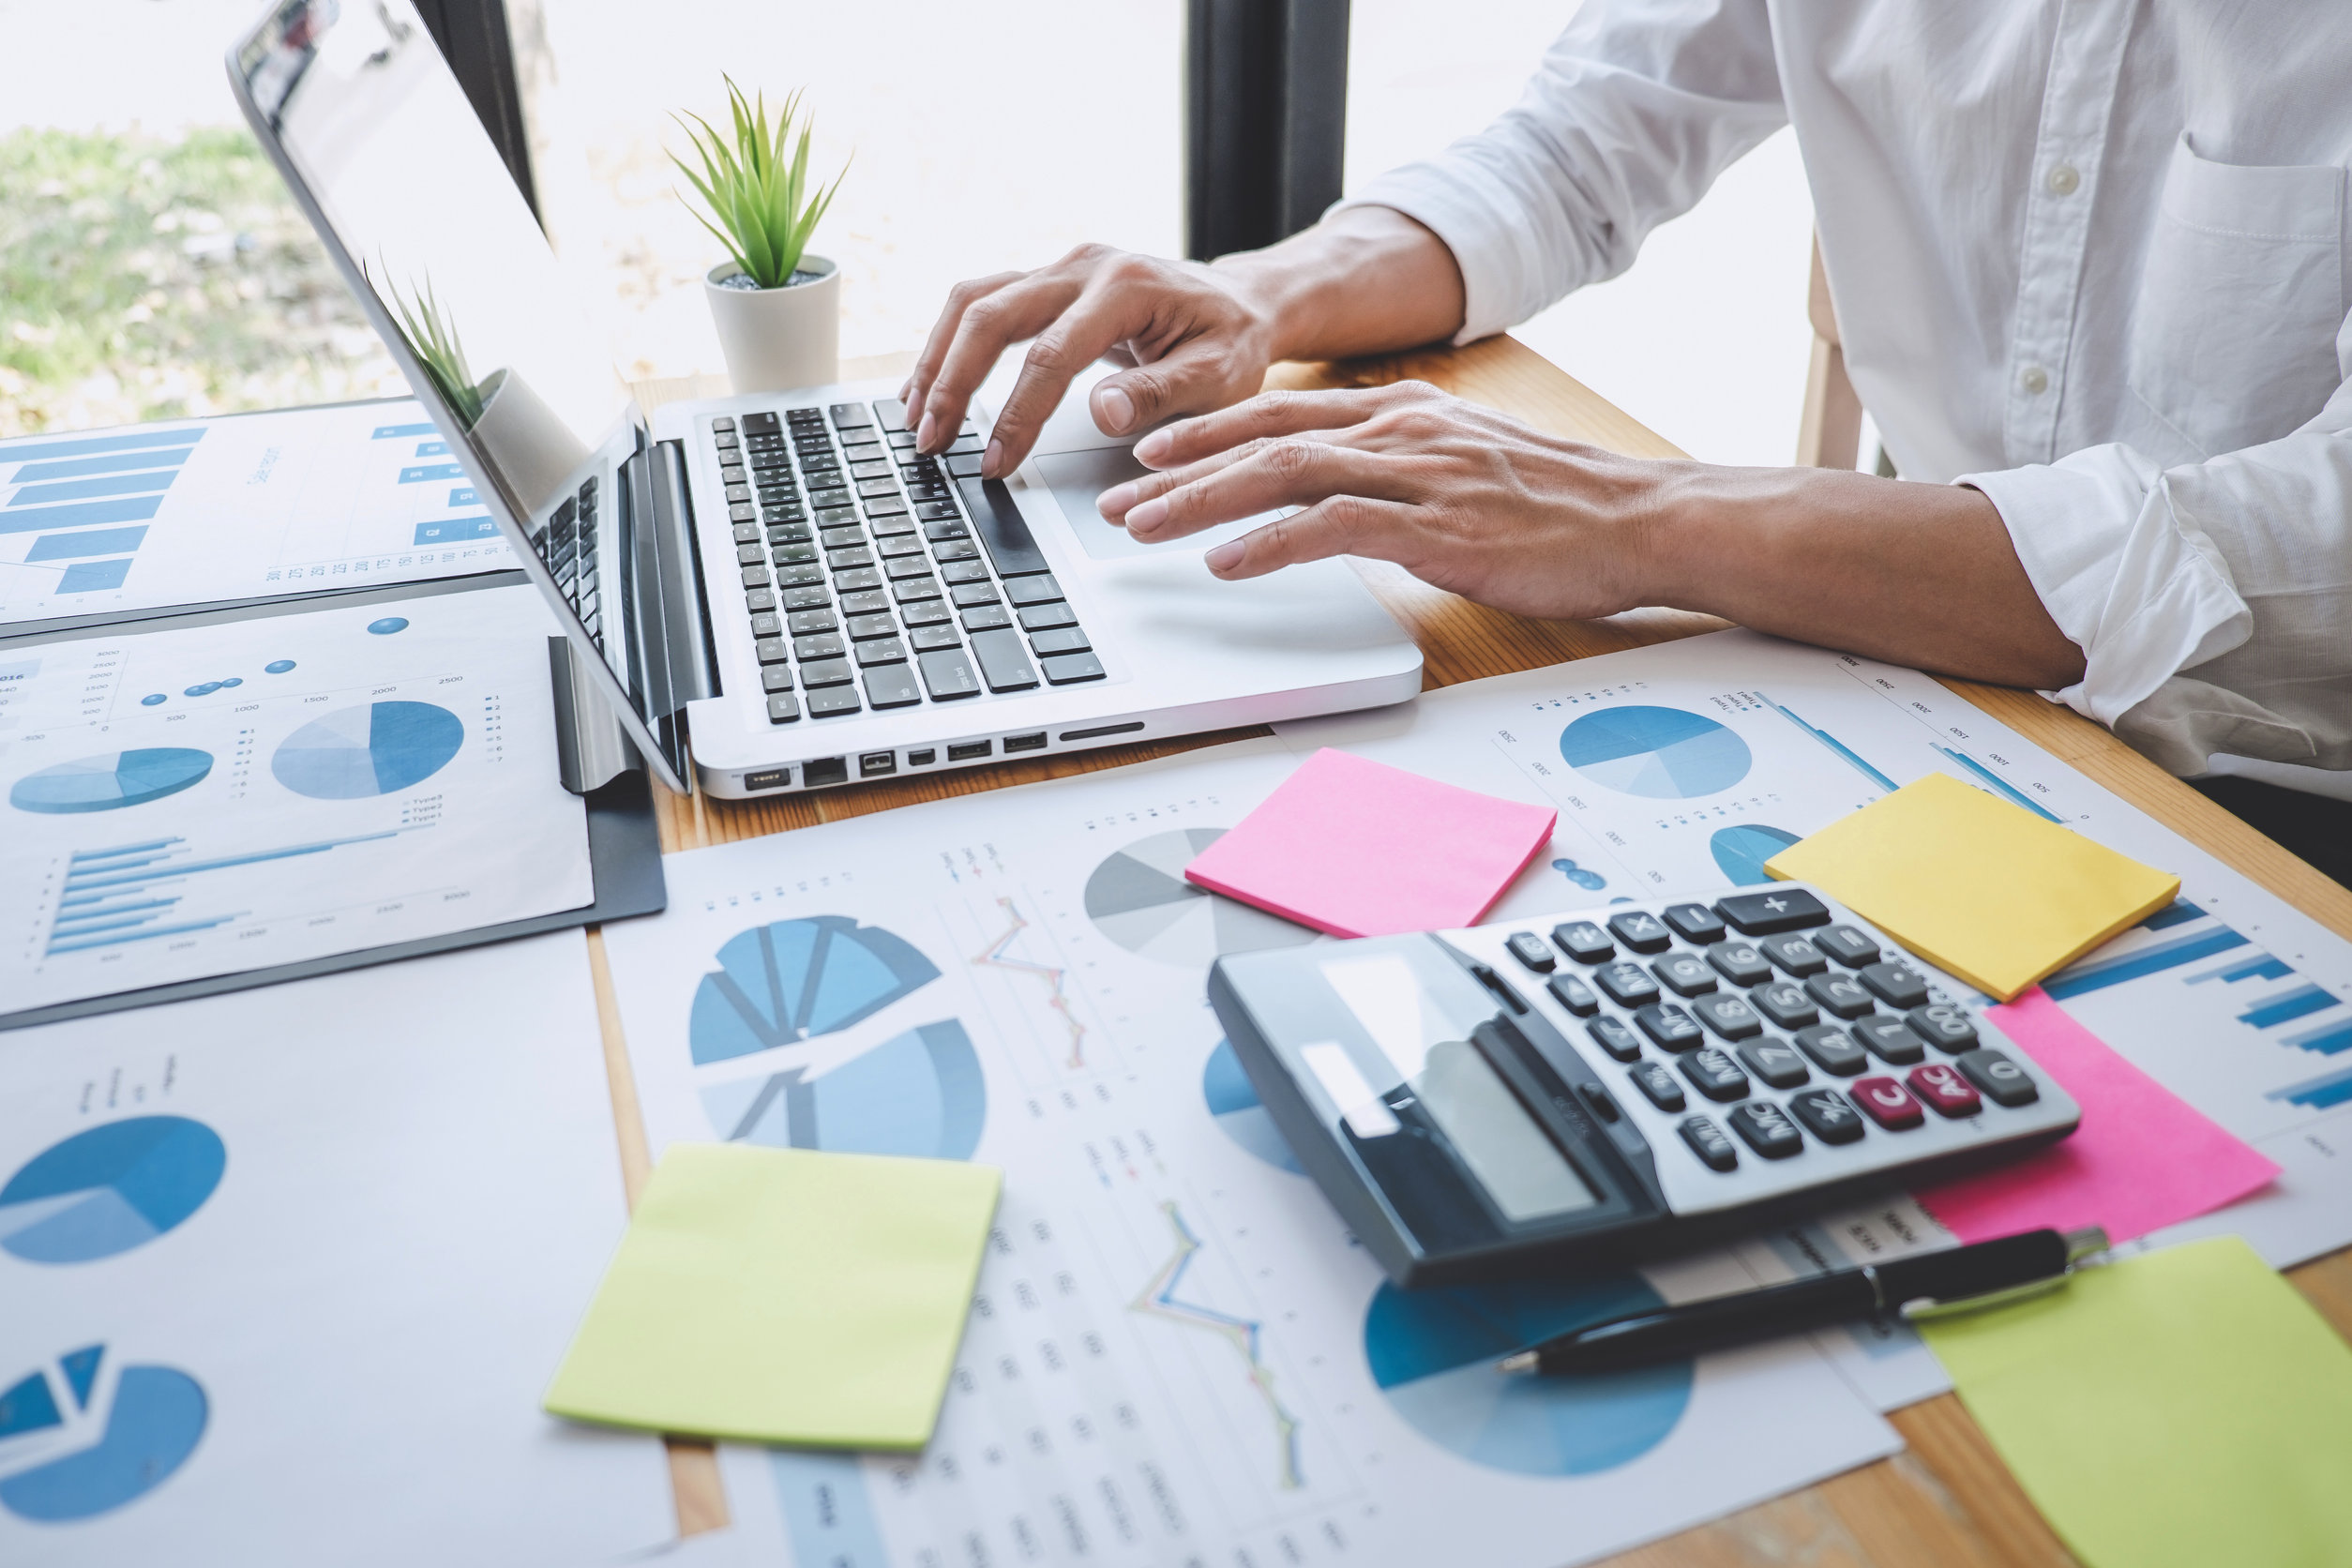 Businesses in Vietnam should outsource accounting service when facing time-sensitive tasks, inconsistent workloads, or to ensure accuracy and legal compliance.